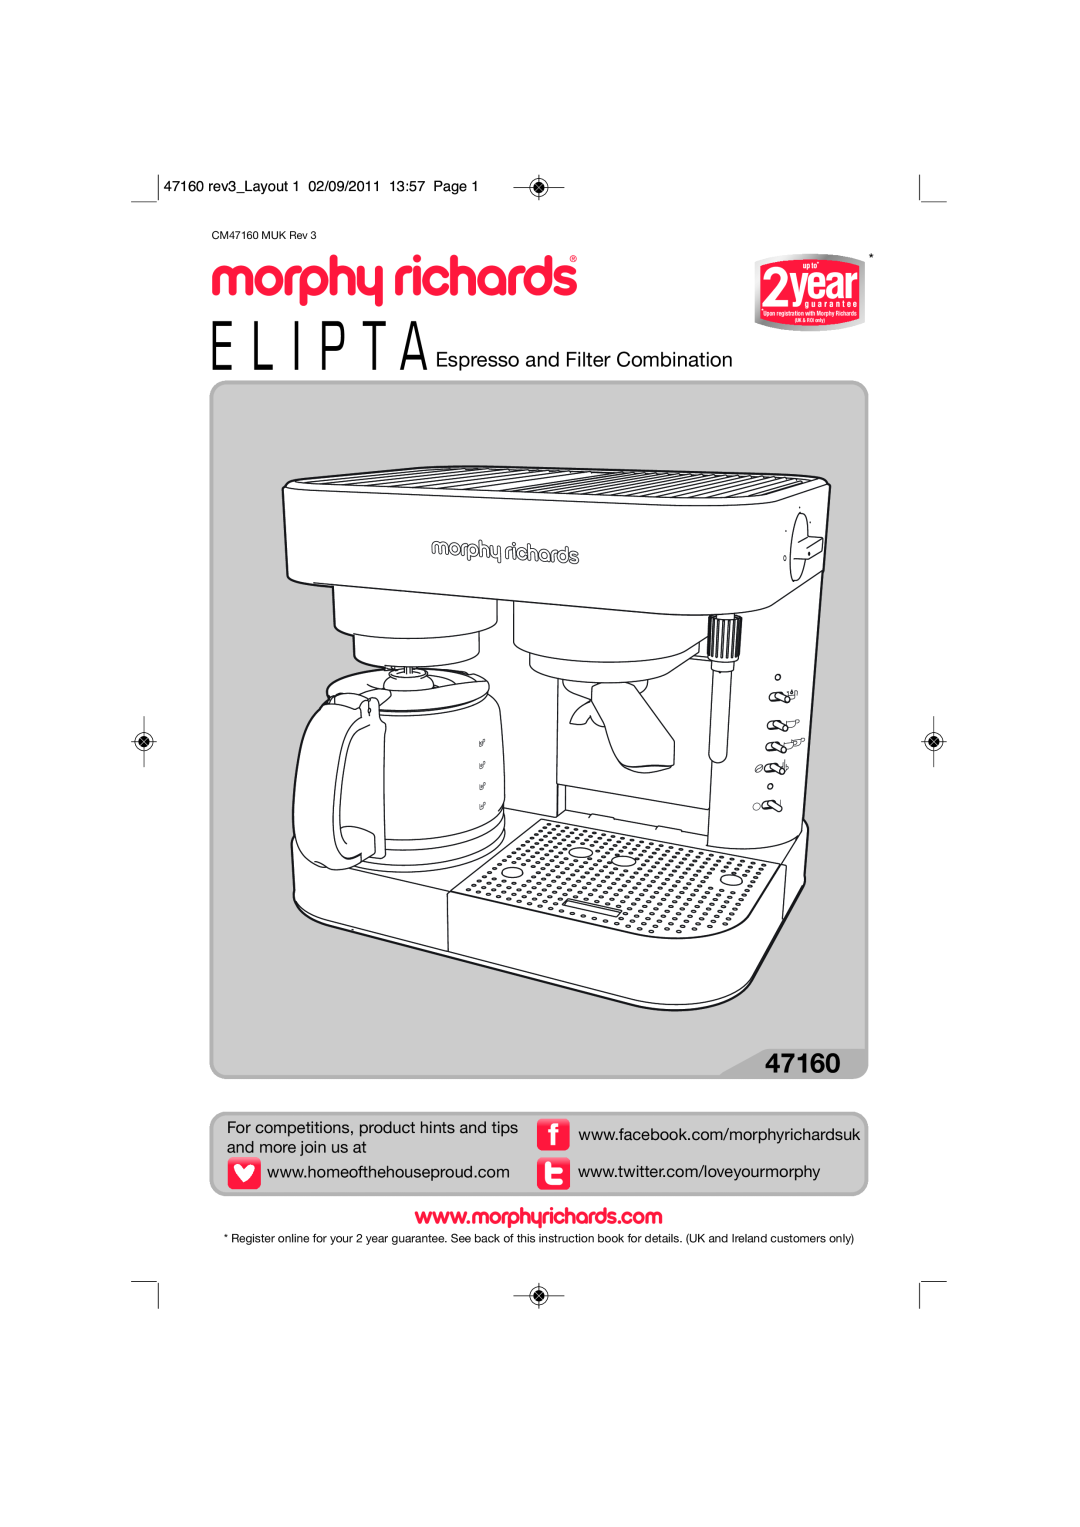 Morphy Richards manual 47160 rev3Layout 1 02/09/2011 1357 Page, Espresso and Filter Combination, UK & ROI only 